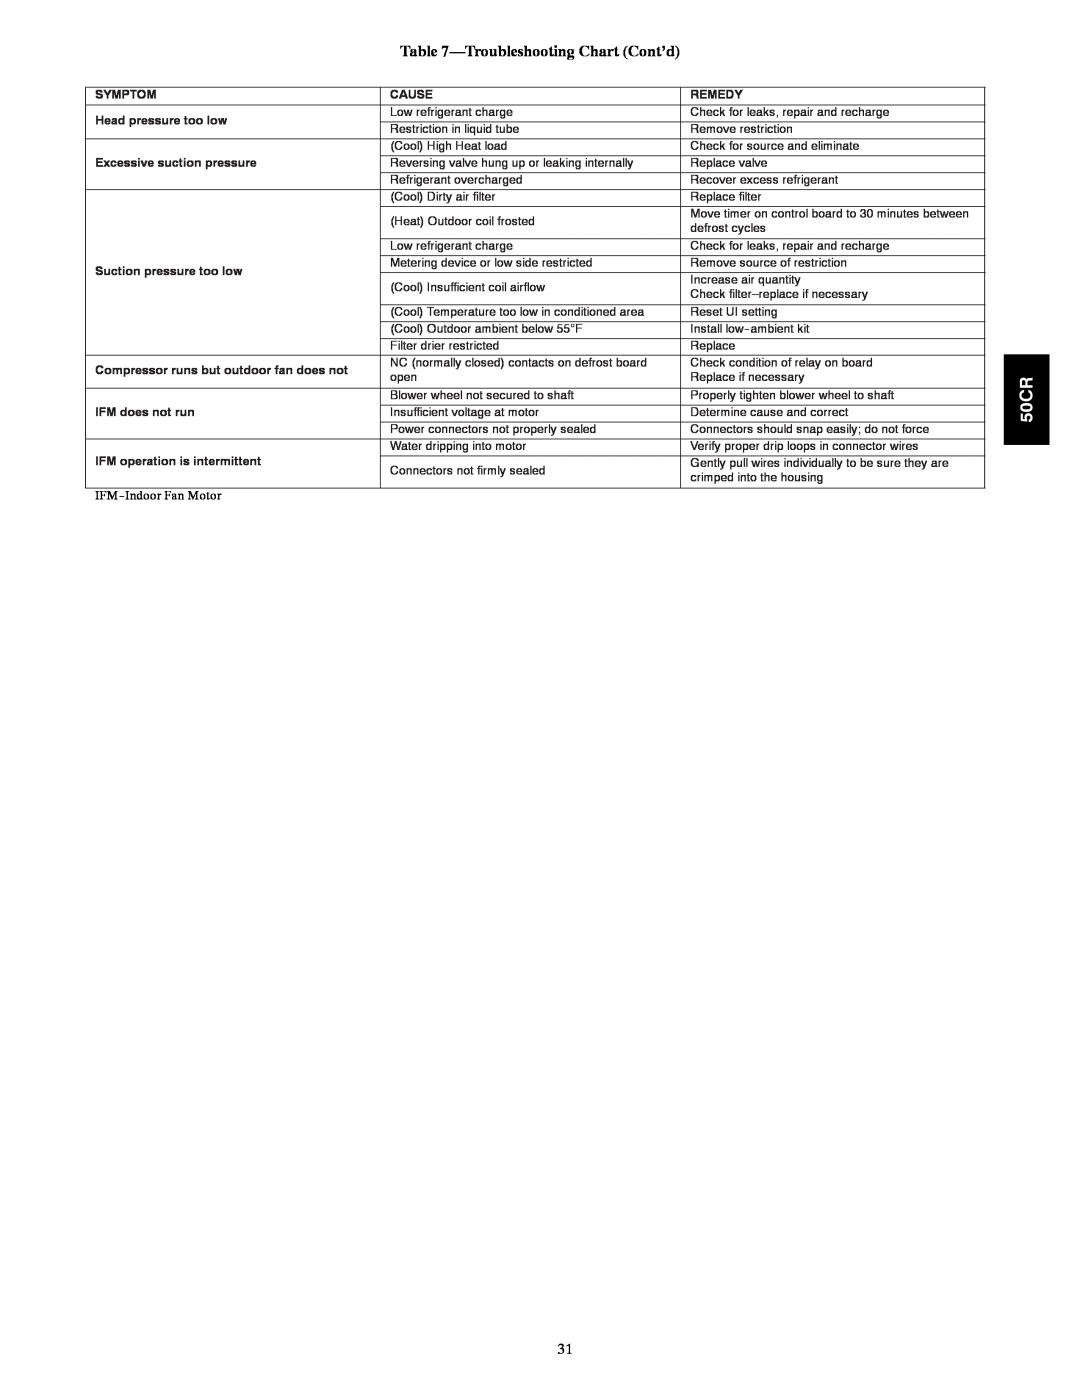 Carrier 50CR installation instructions TroubleshootingChart Cont’d, IFM-IndoorFan Motor 